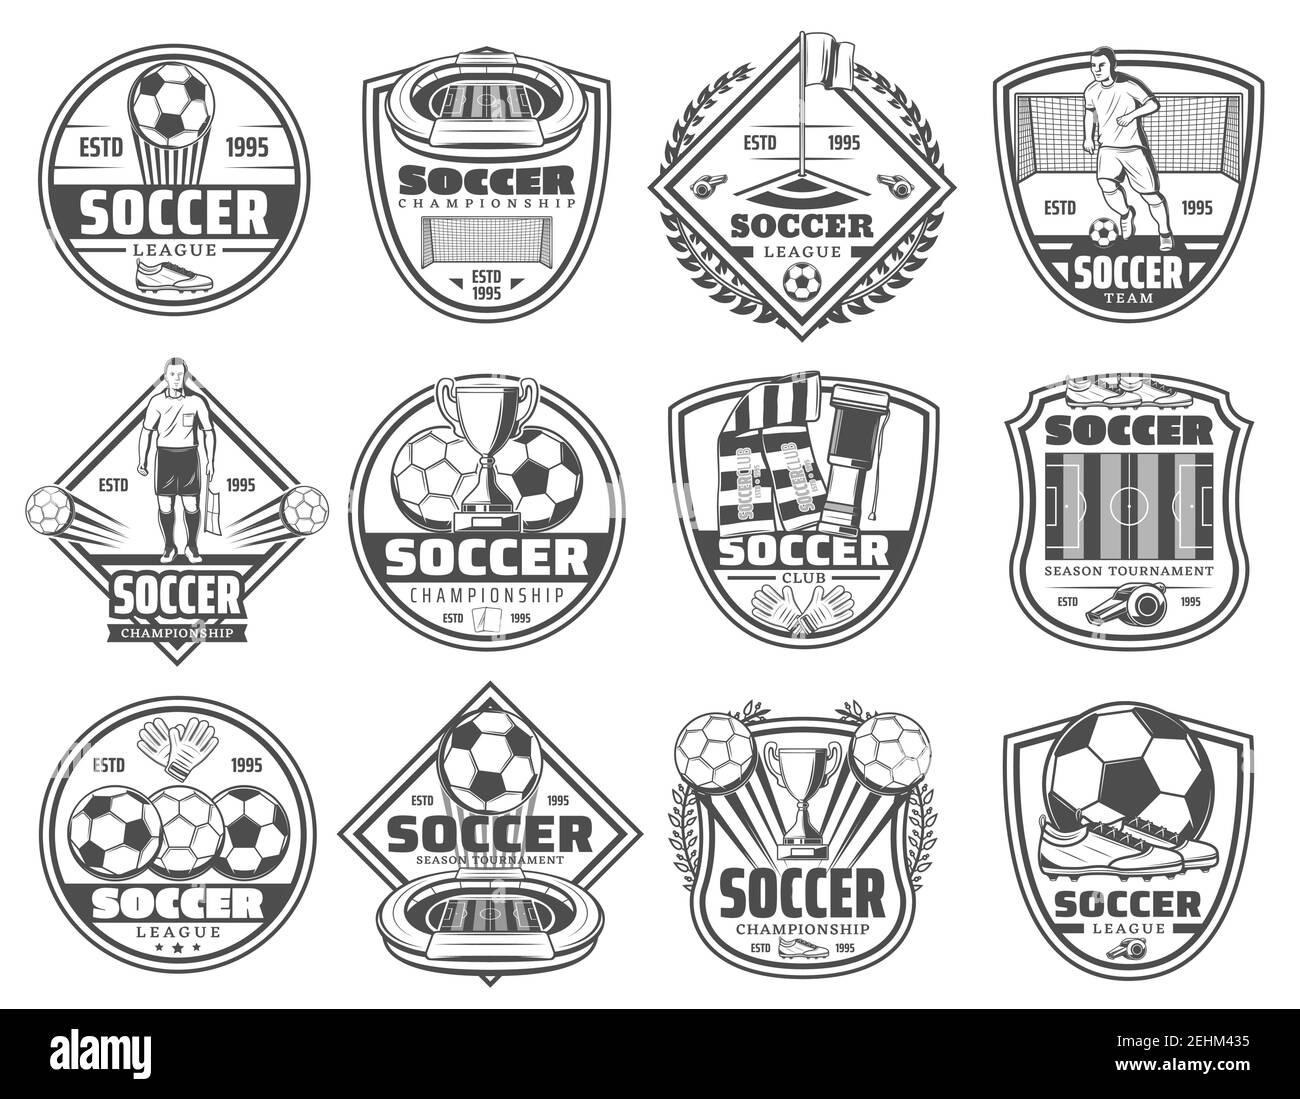 Football or soccer sport heraldic shields and icons. Football game player with soccer ball and trophy cup, stadium and field, goal gate for championsh Stock Vector